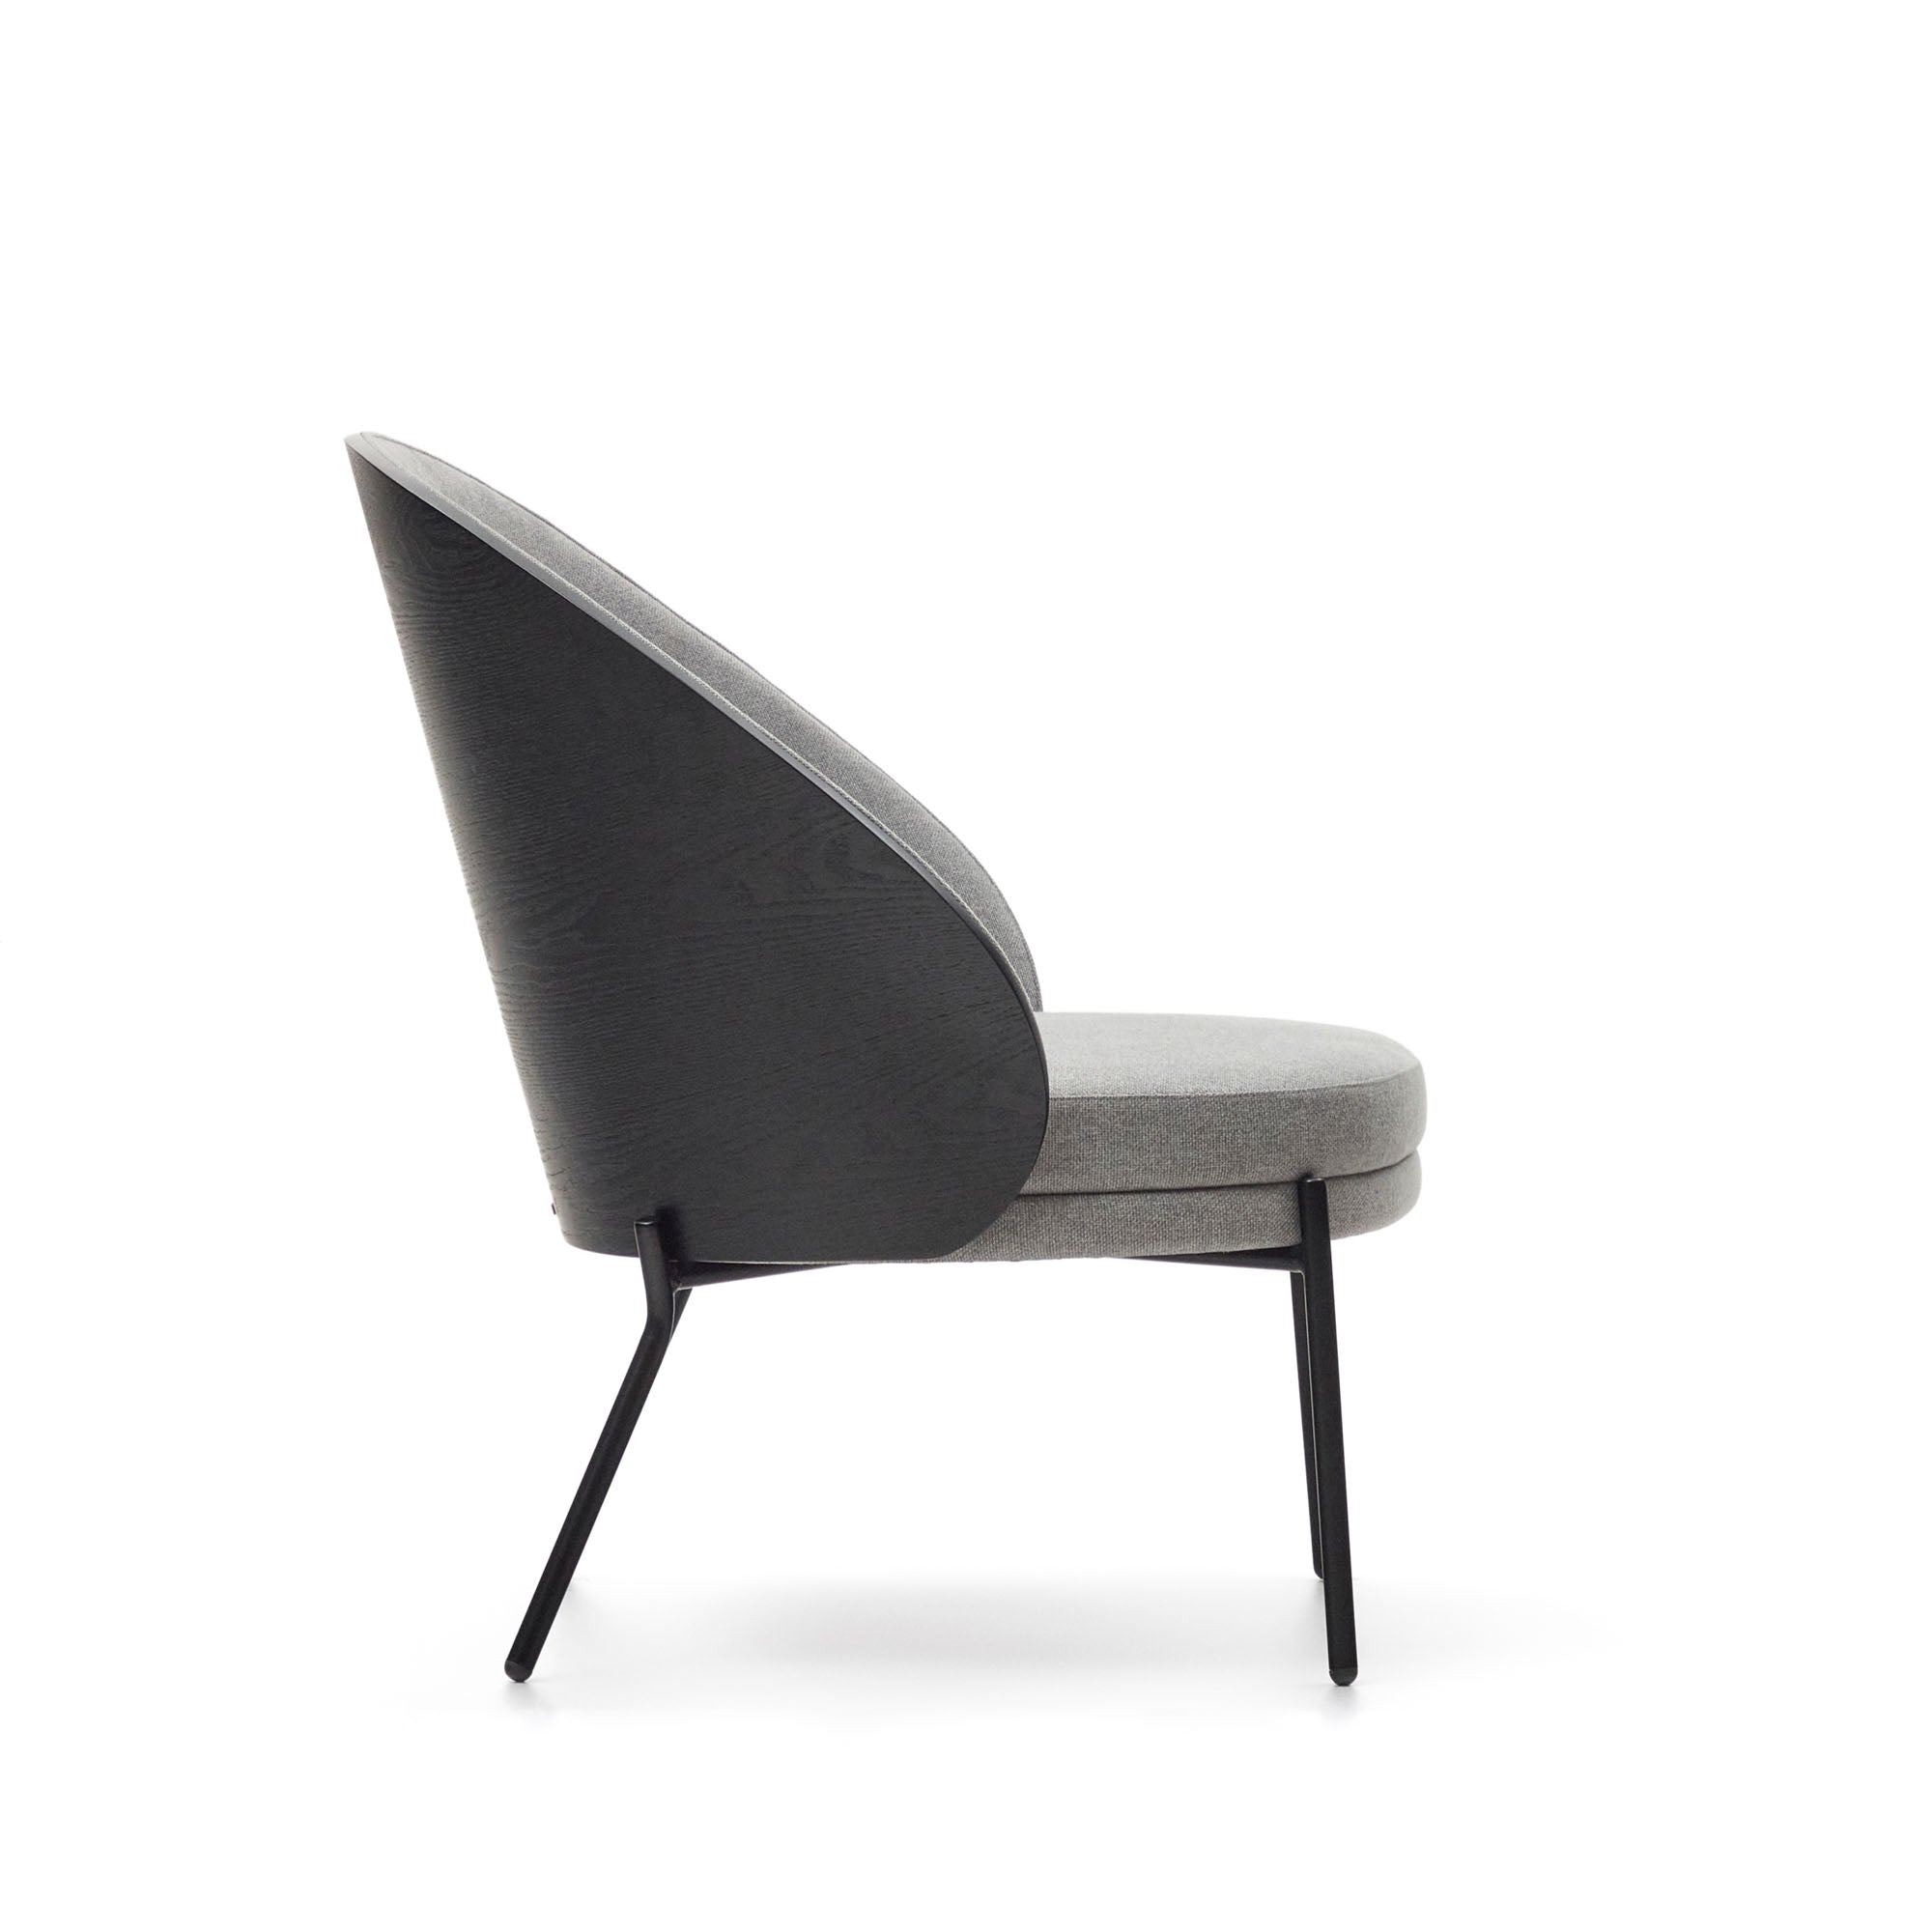 Eamy light grey armchair in an ash wood veneer with a black finish and black metal